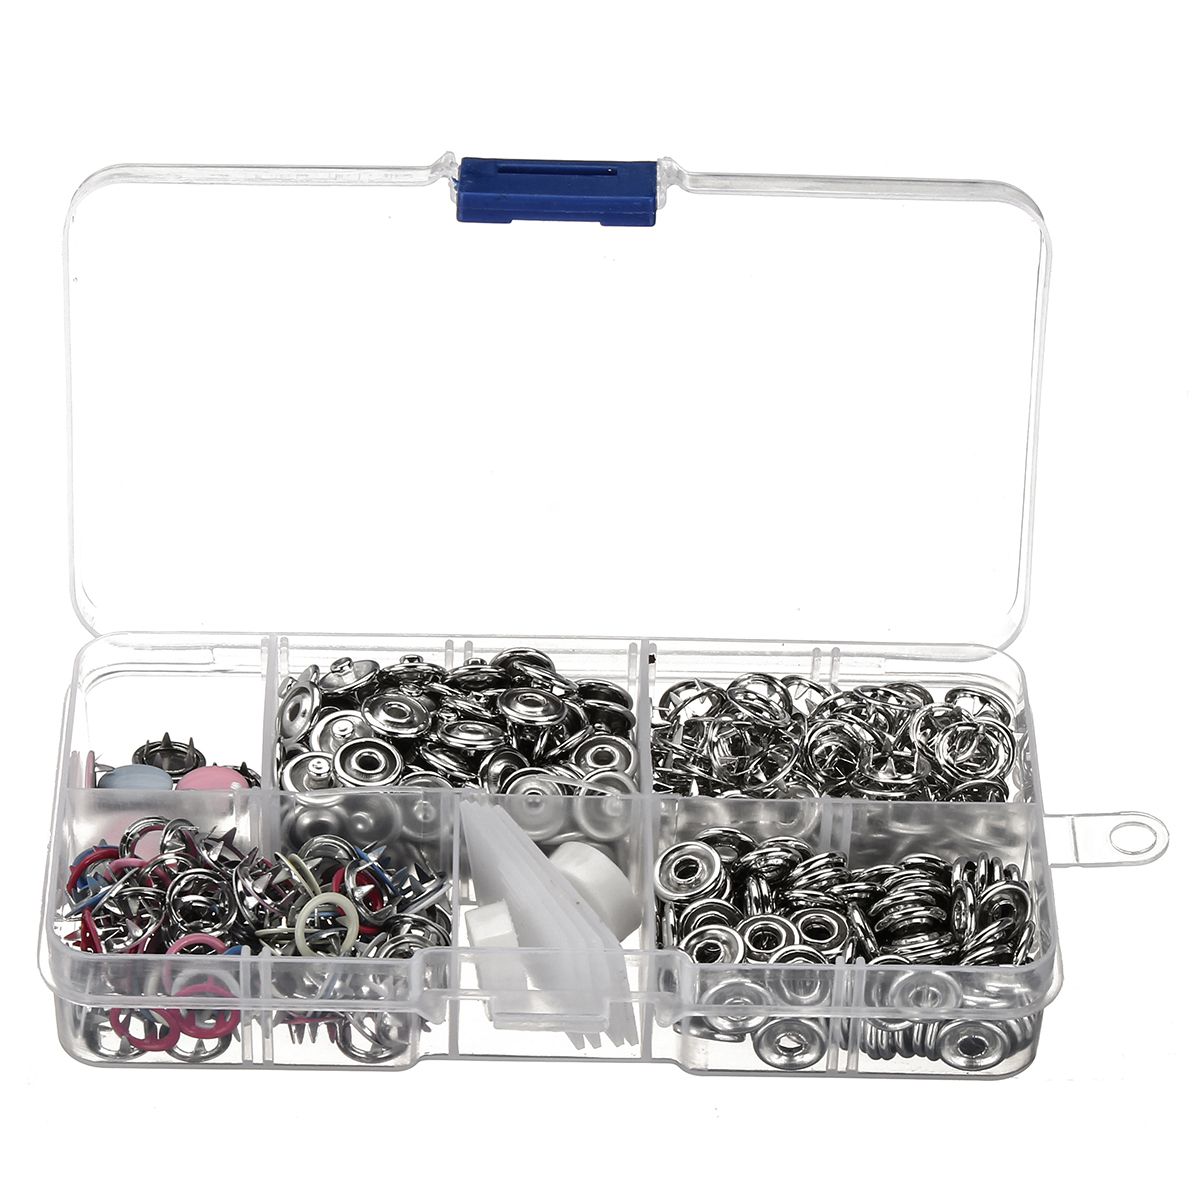 110-Set-Metal-Press-Studs-Sewing-Button-Clothing-Snap-Fasteners--Pliers-Tools-Fasteners-SnapMetal-Pr-1543376